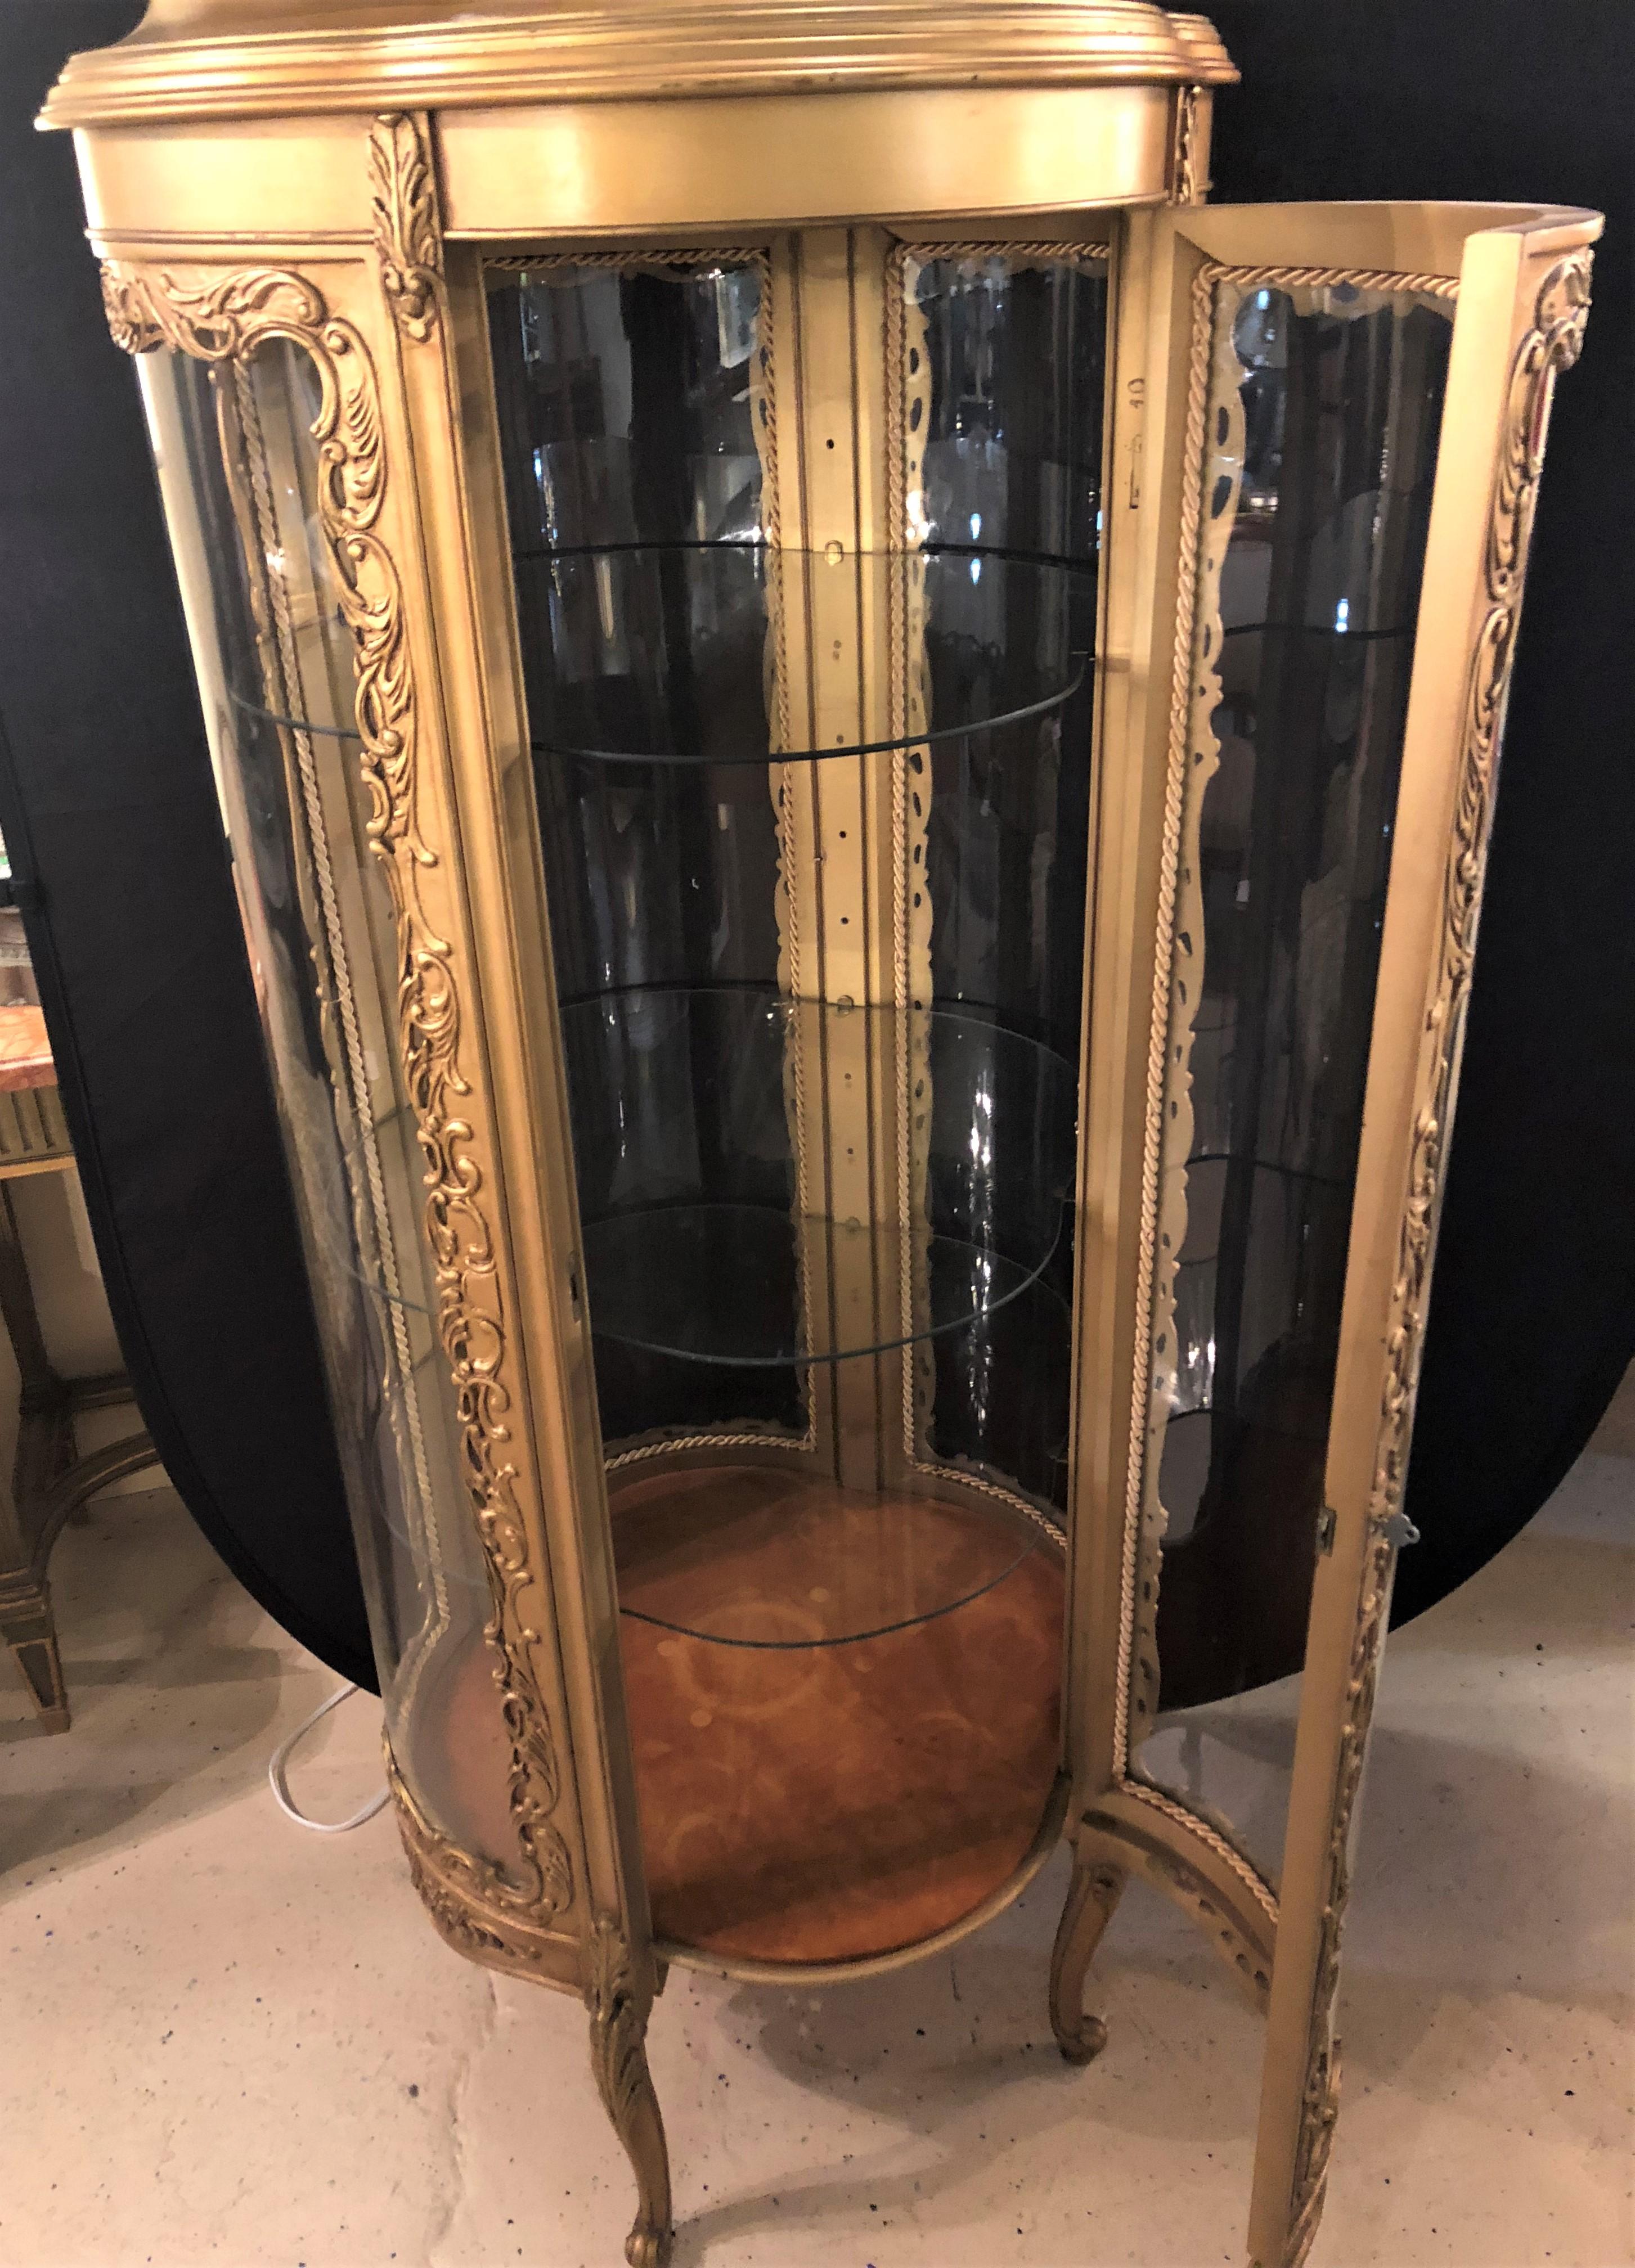 A wonderful Louis XV style clover circular giltwood lighted curio vitrine showcase. This simply stunning curio has a lighted interior along with three adjustable shelves in a round serpentine shape. The double clover like shape make this finely gilt